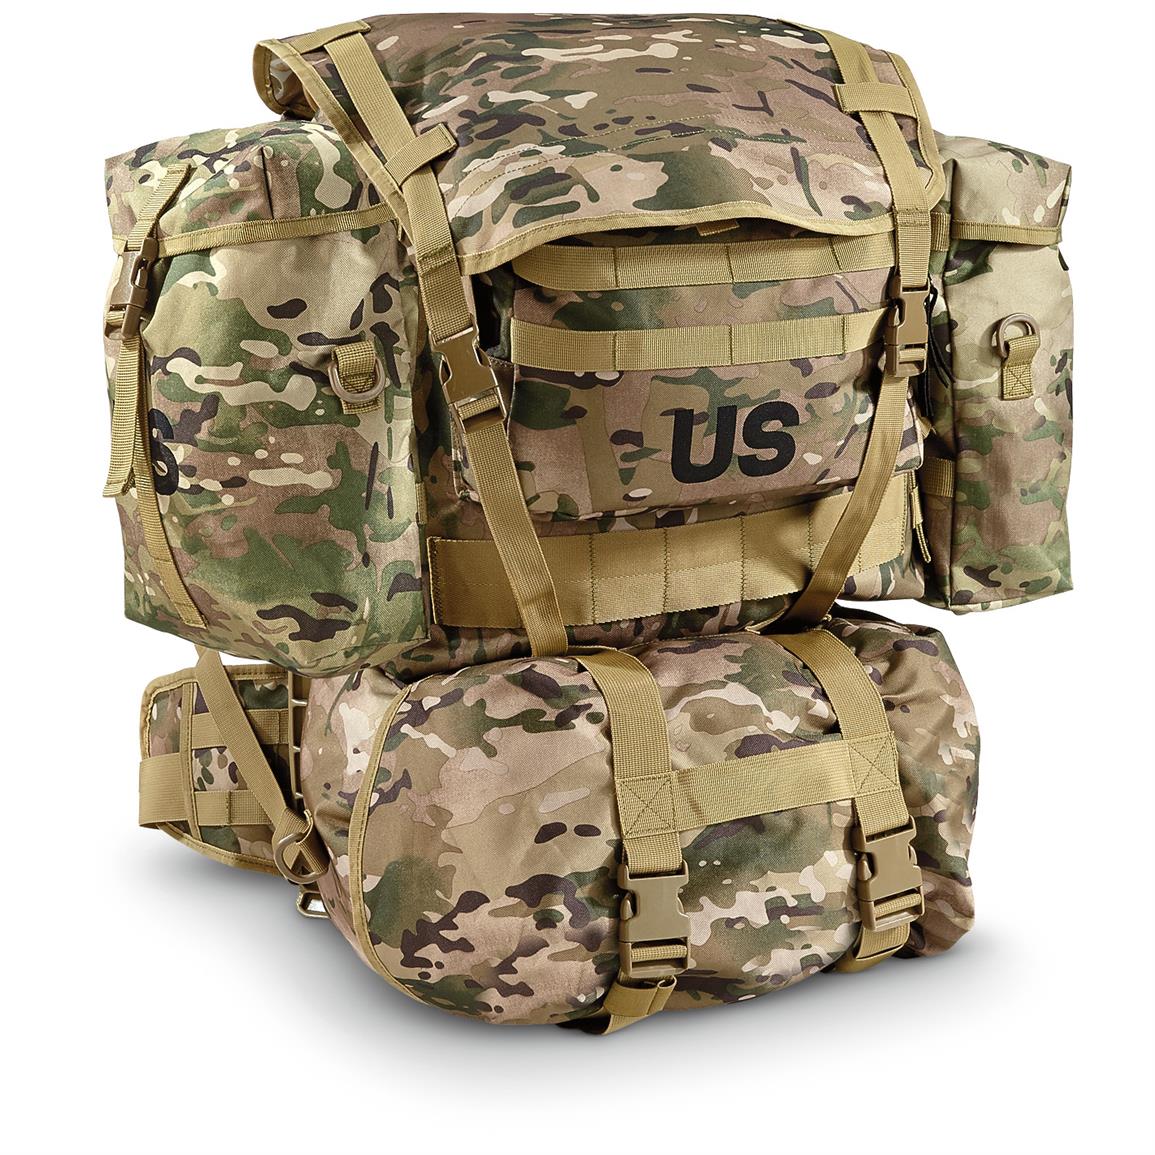 Akmax Military MOLLE Army Large Rucksack With Frame Multicam ...